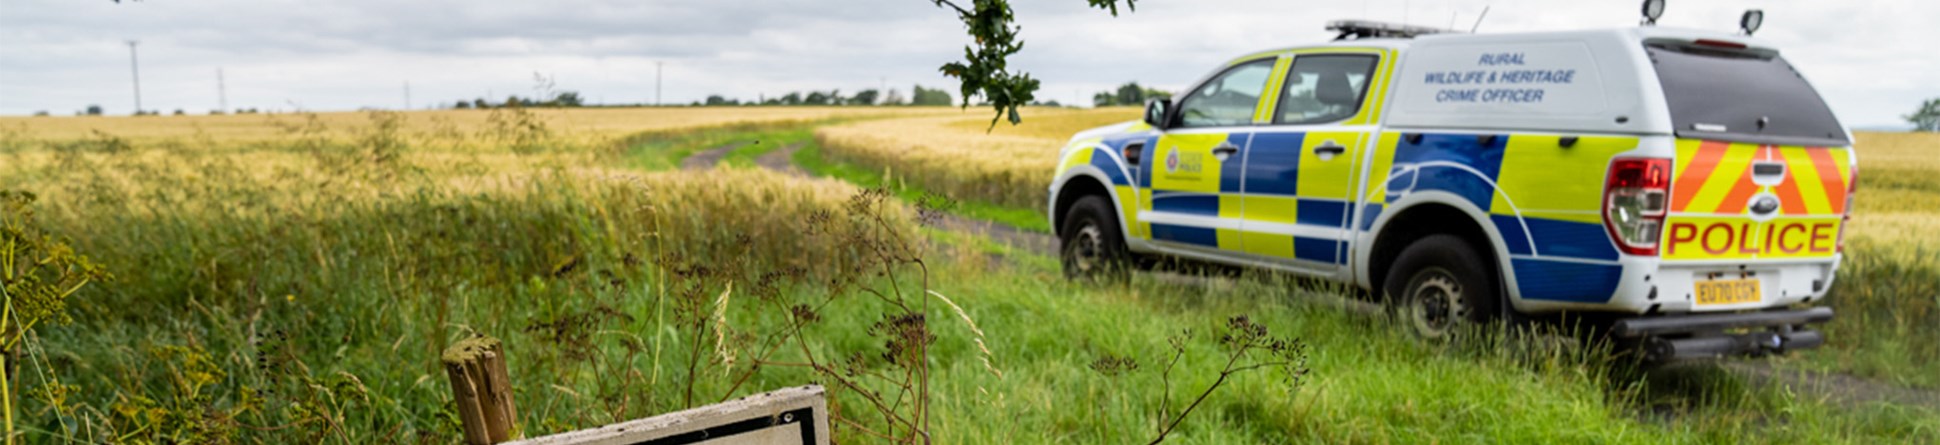 A photograph of a police SUV parked in a field. A sign in the foreground reads "Private Road / No entry"